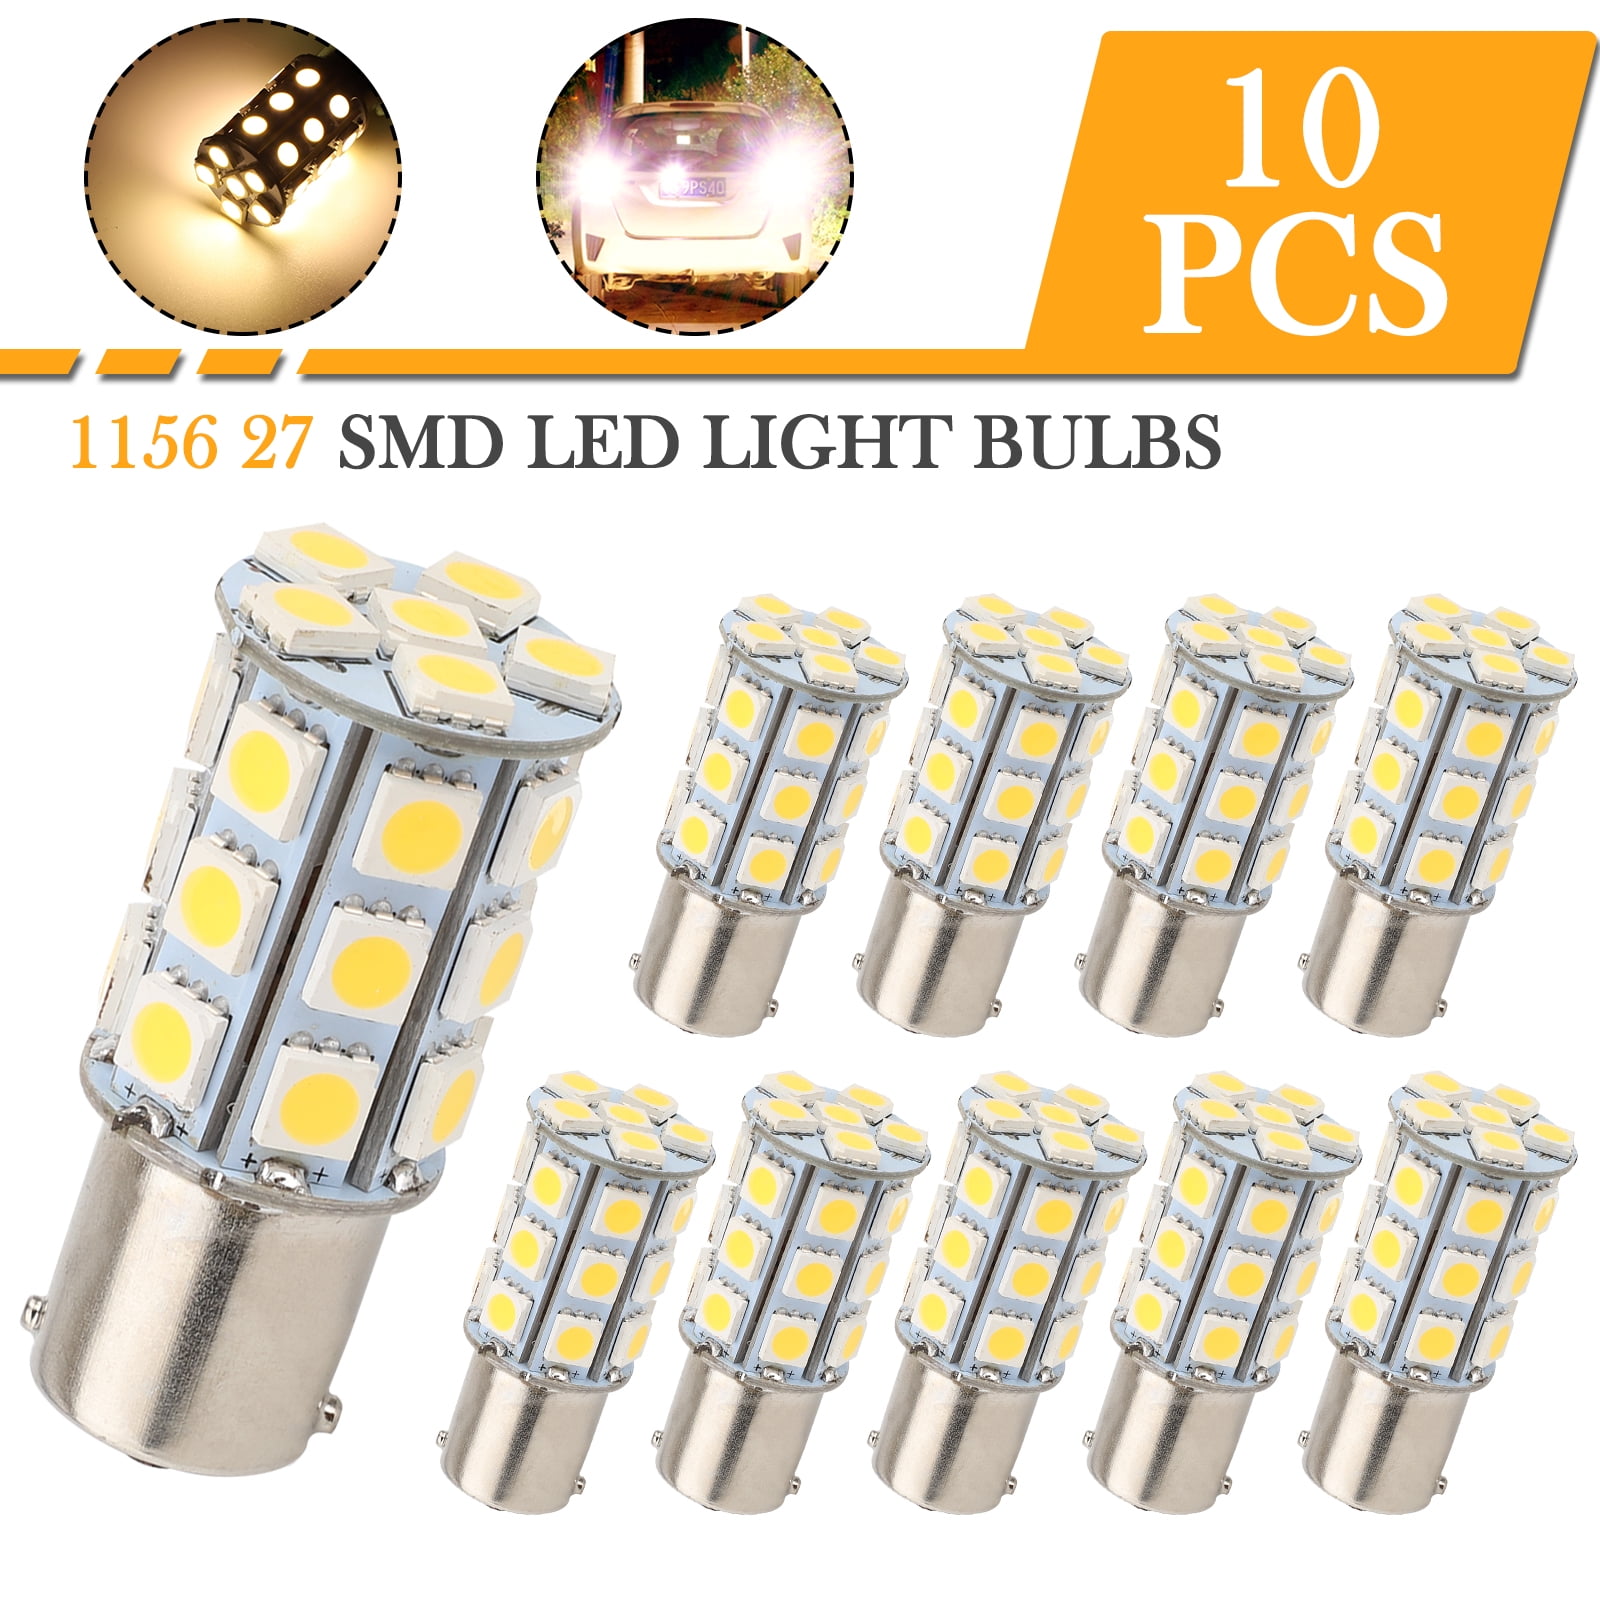 Pack of 8 Super Bright 1156 BA15S 1141 1003 1073 7506 LED Bulbs Warm White 5050 18-SMD Replacement Lamps For 12V RV Interior Ceiling Dome Light/Travel Trailer/Camper/Boat Yard Light Bulbs UNXMRFF 